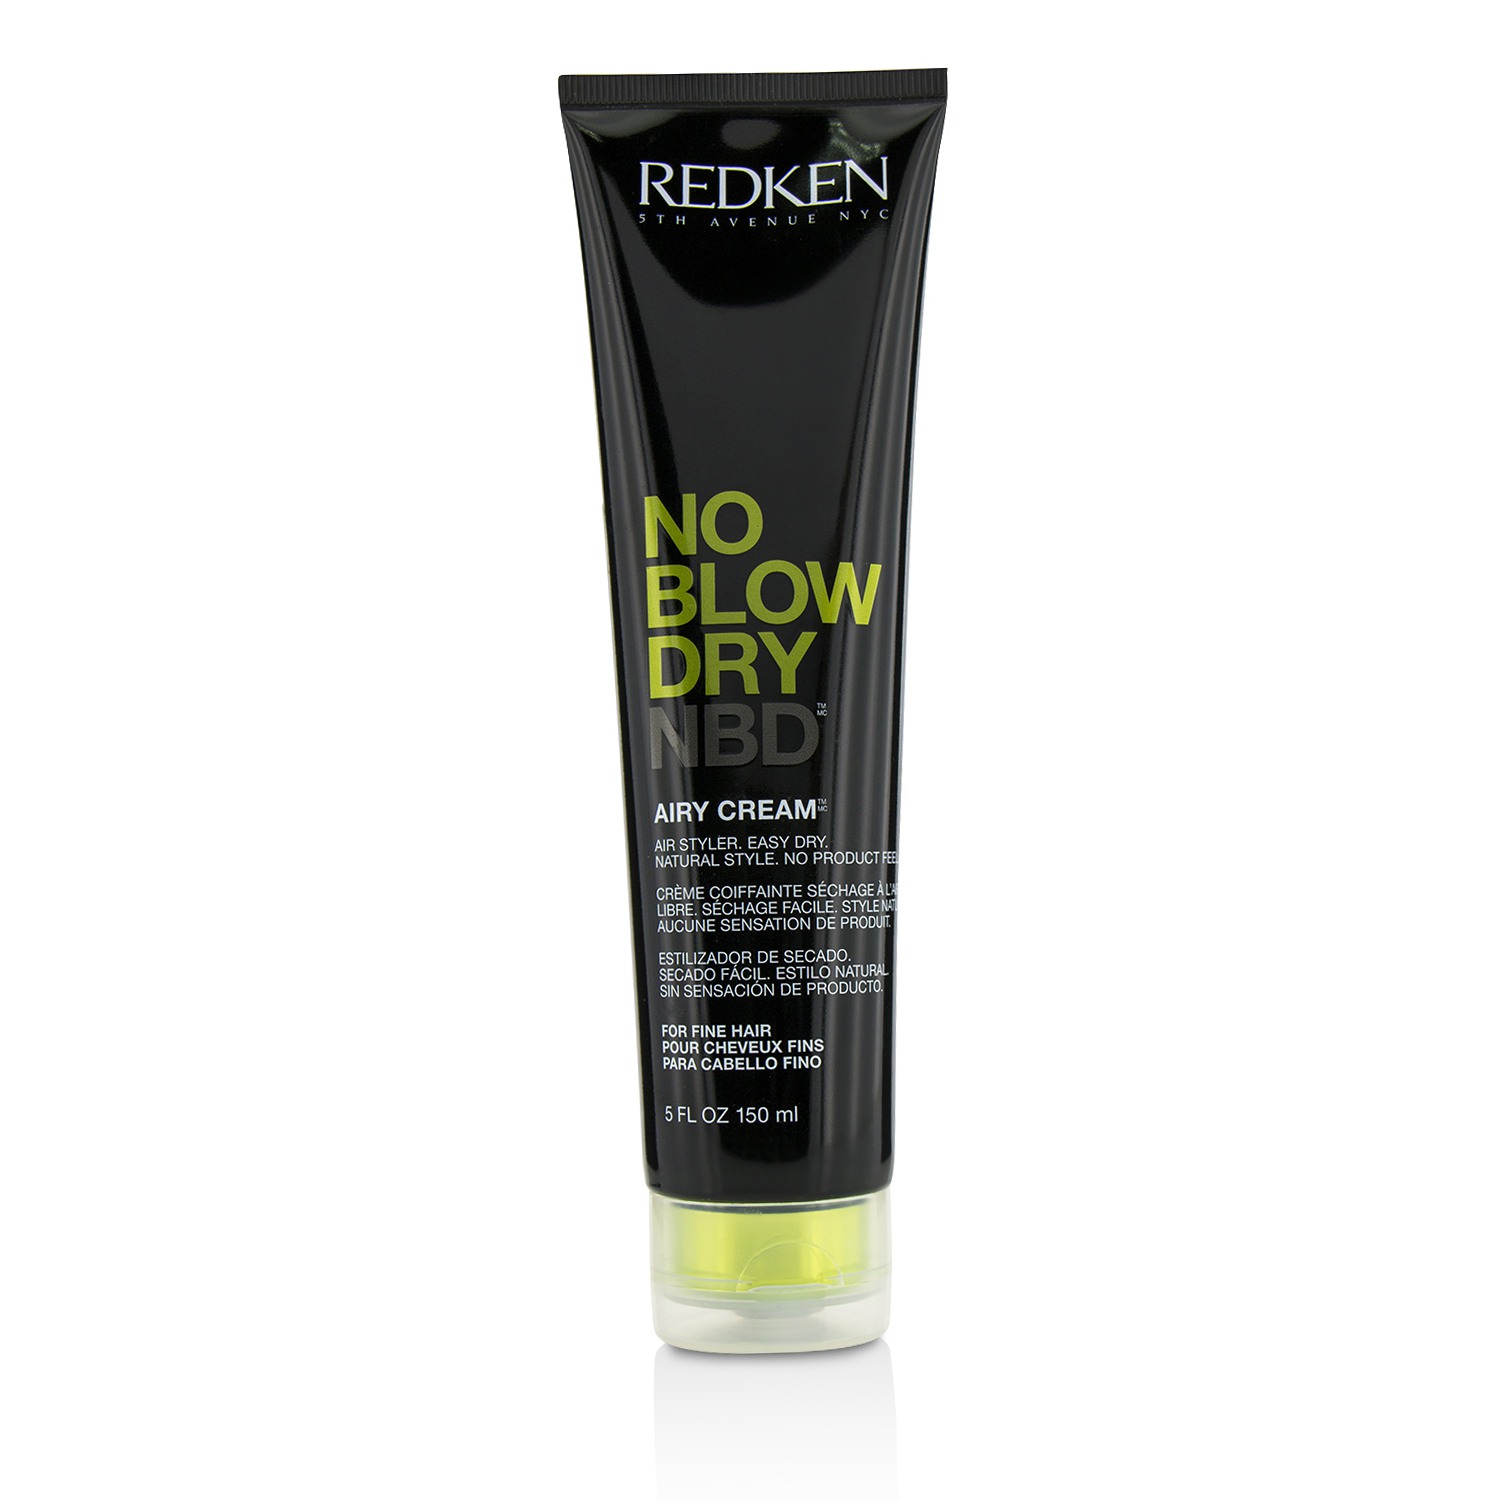 No Blow Dry Airy Cream (For Fine Hair) Redken Image